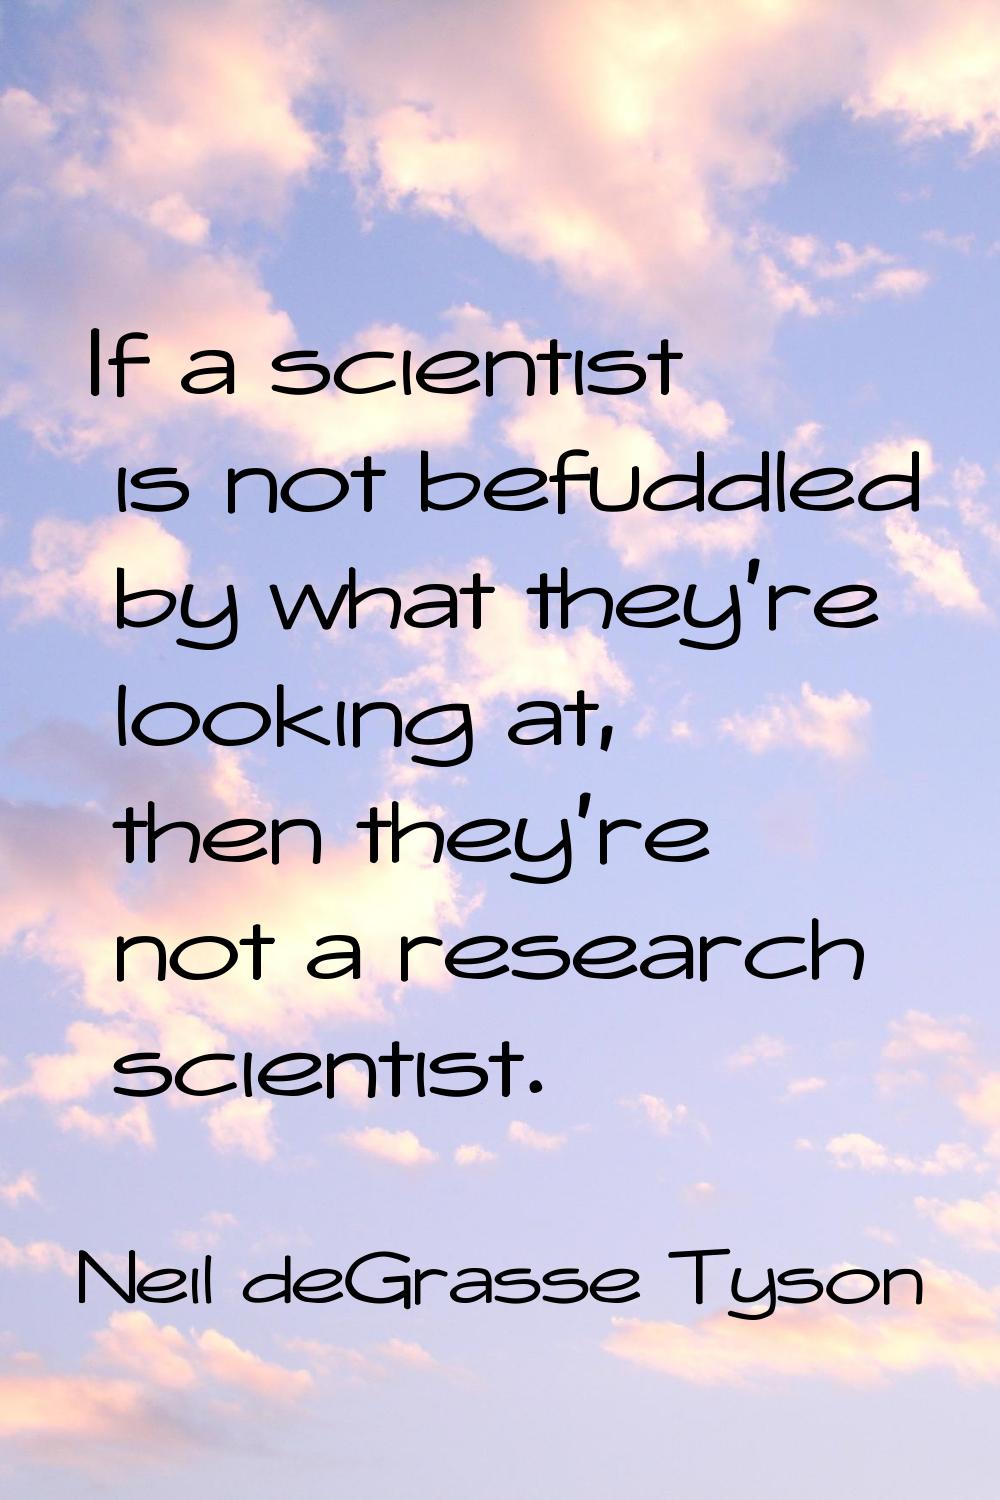 If a scientist is not befuddled by what they're looking at, then they're not a research scientist.